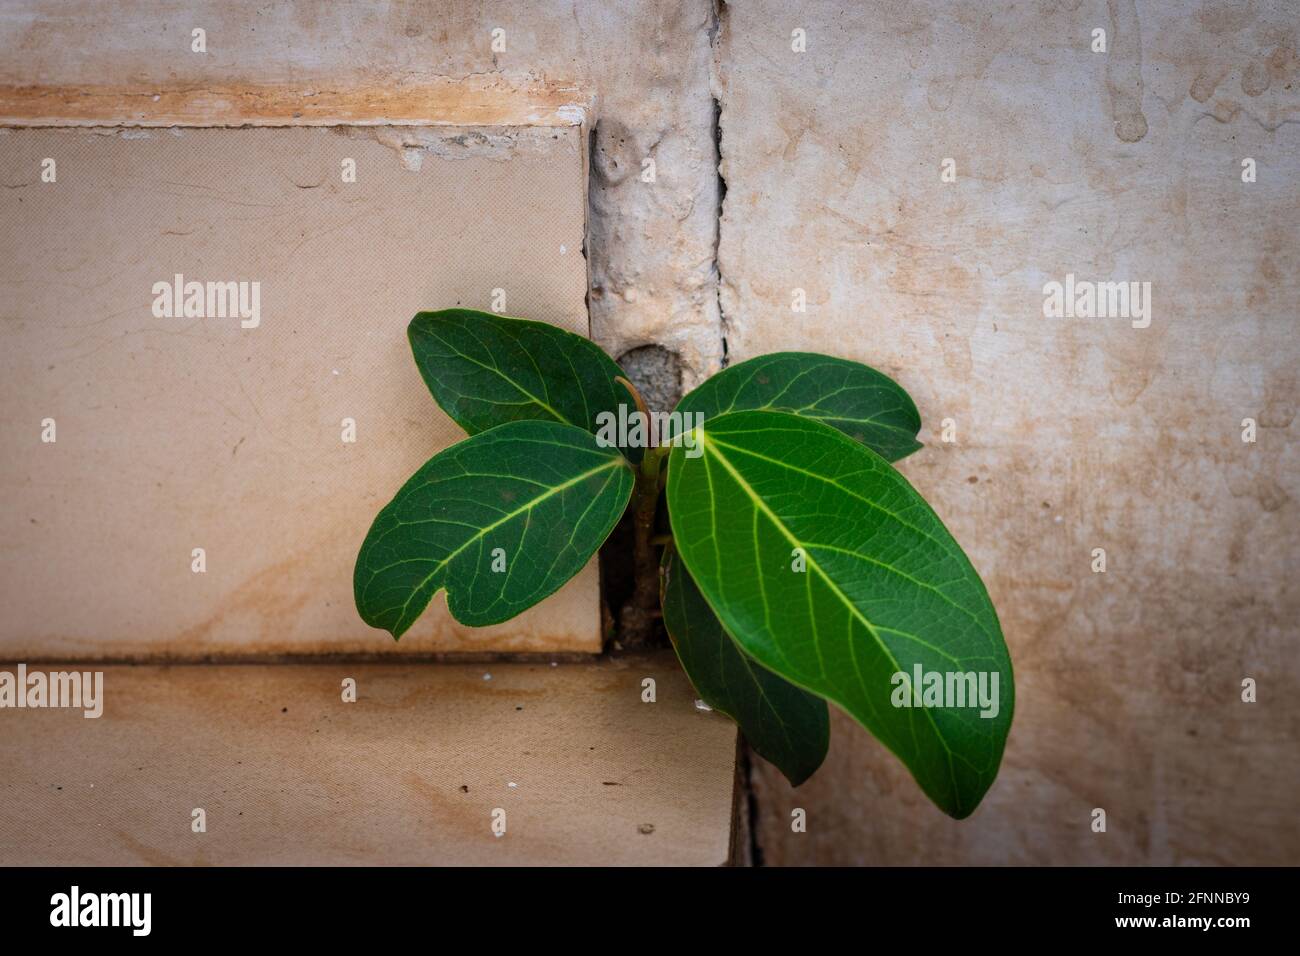 banyan tree growing in concrete wall holes showing the act of nature Stock Photo